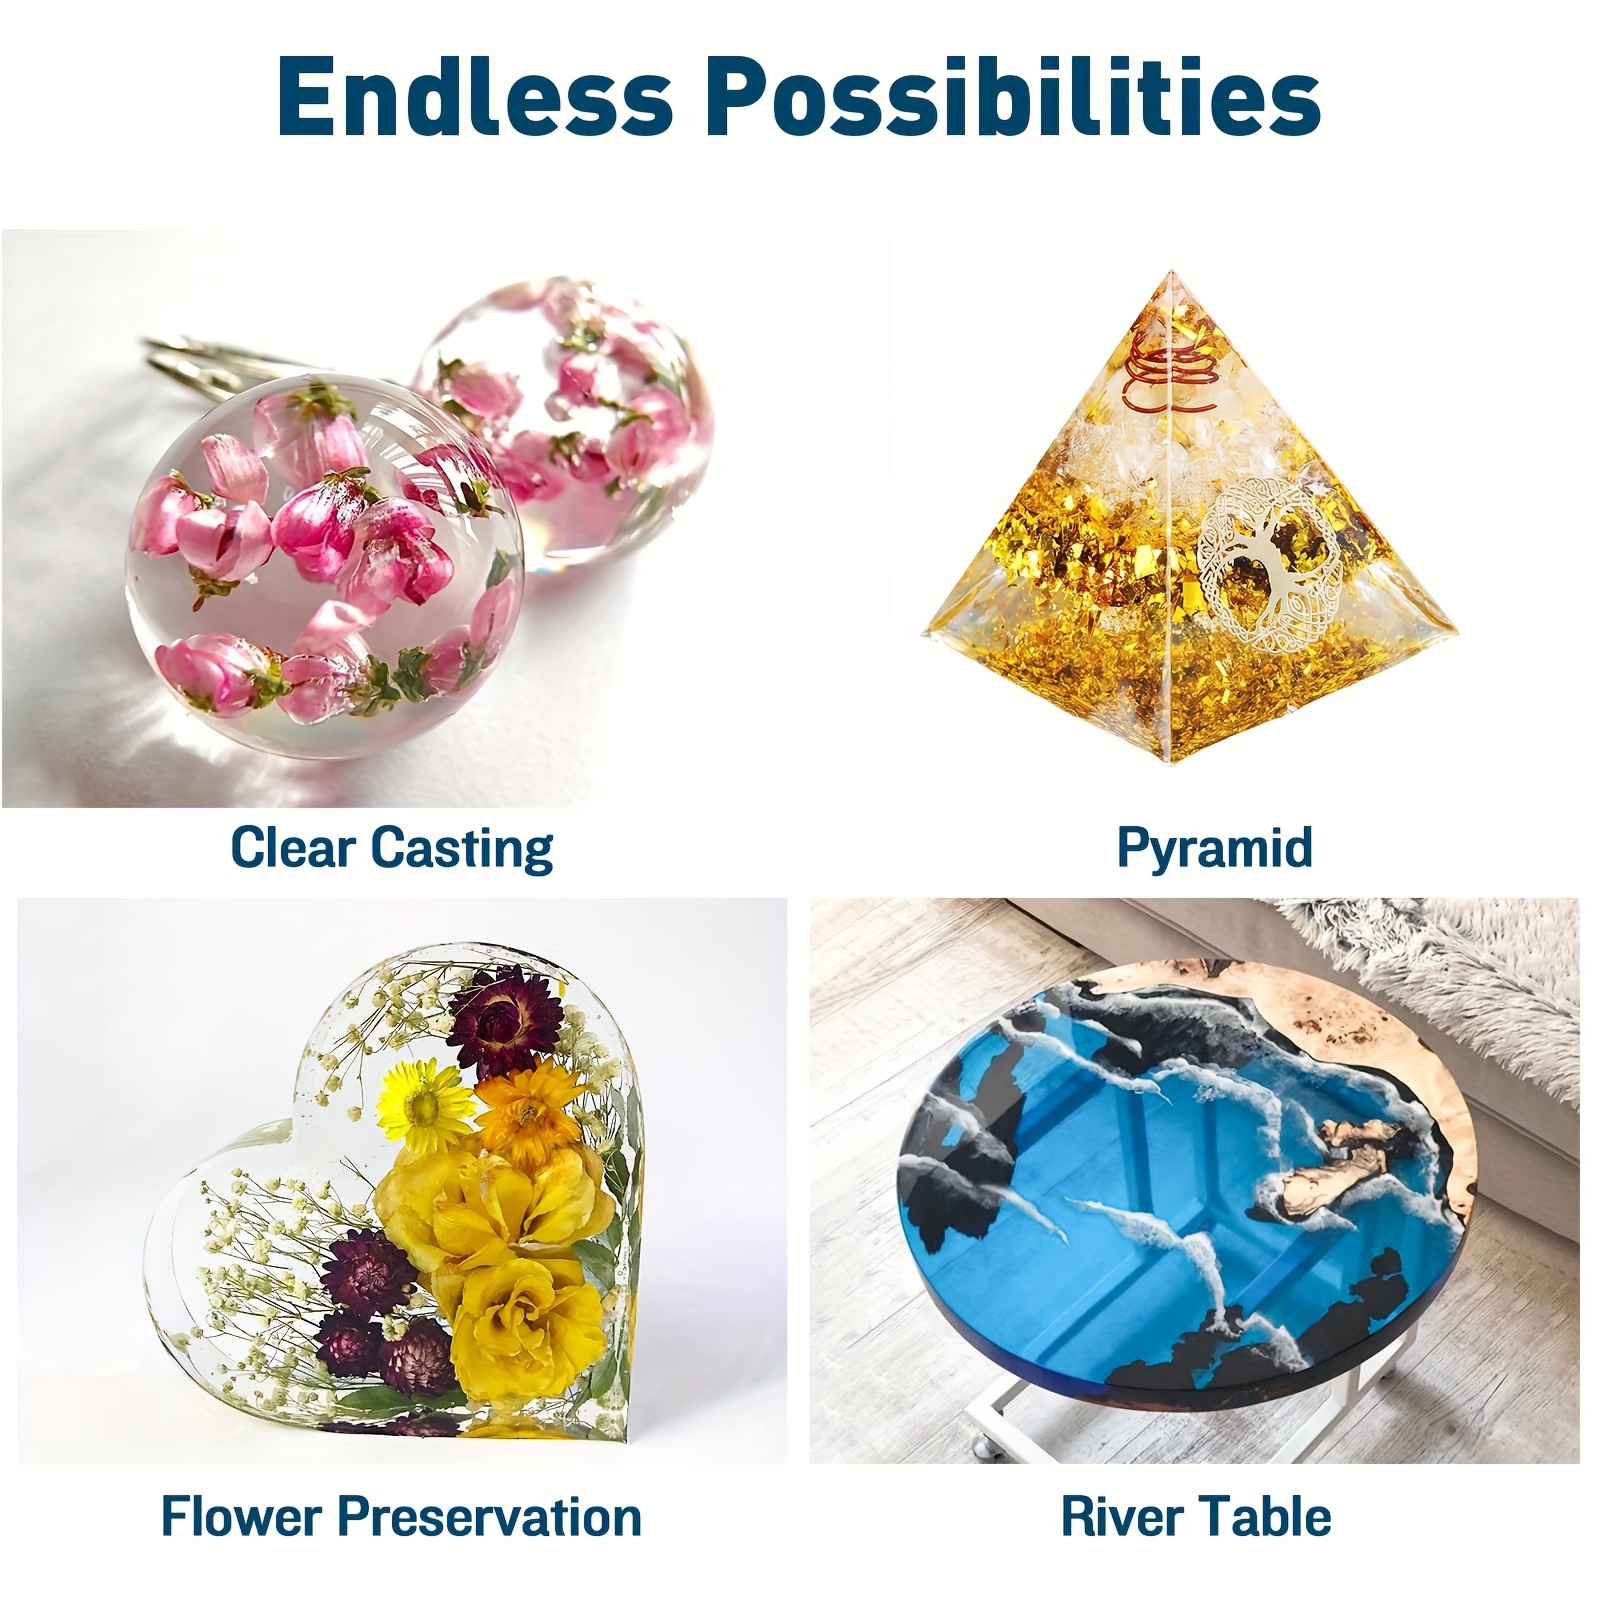 Epoxy Resin Flower Preservations Guide - Superclear Epoxy Resin